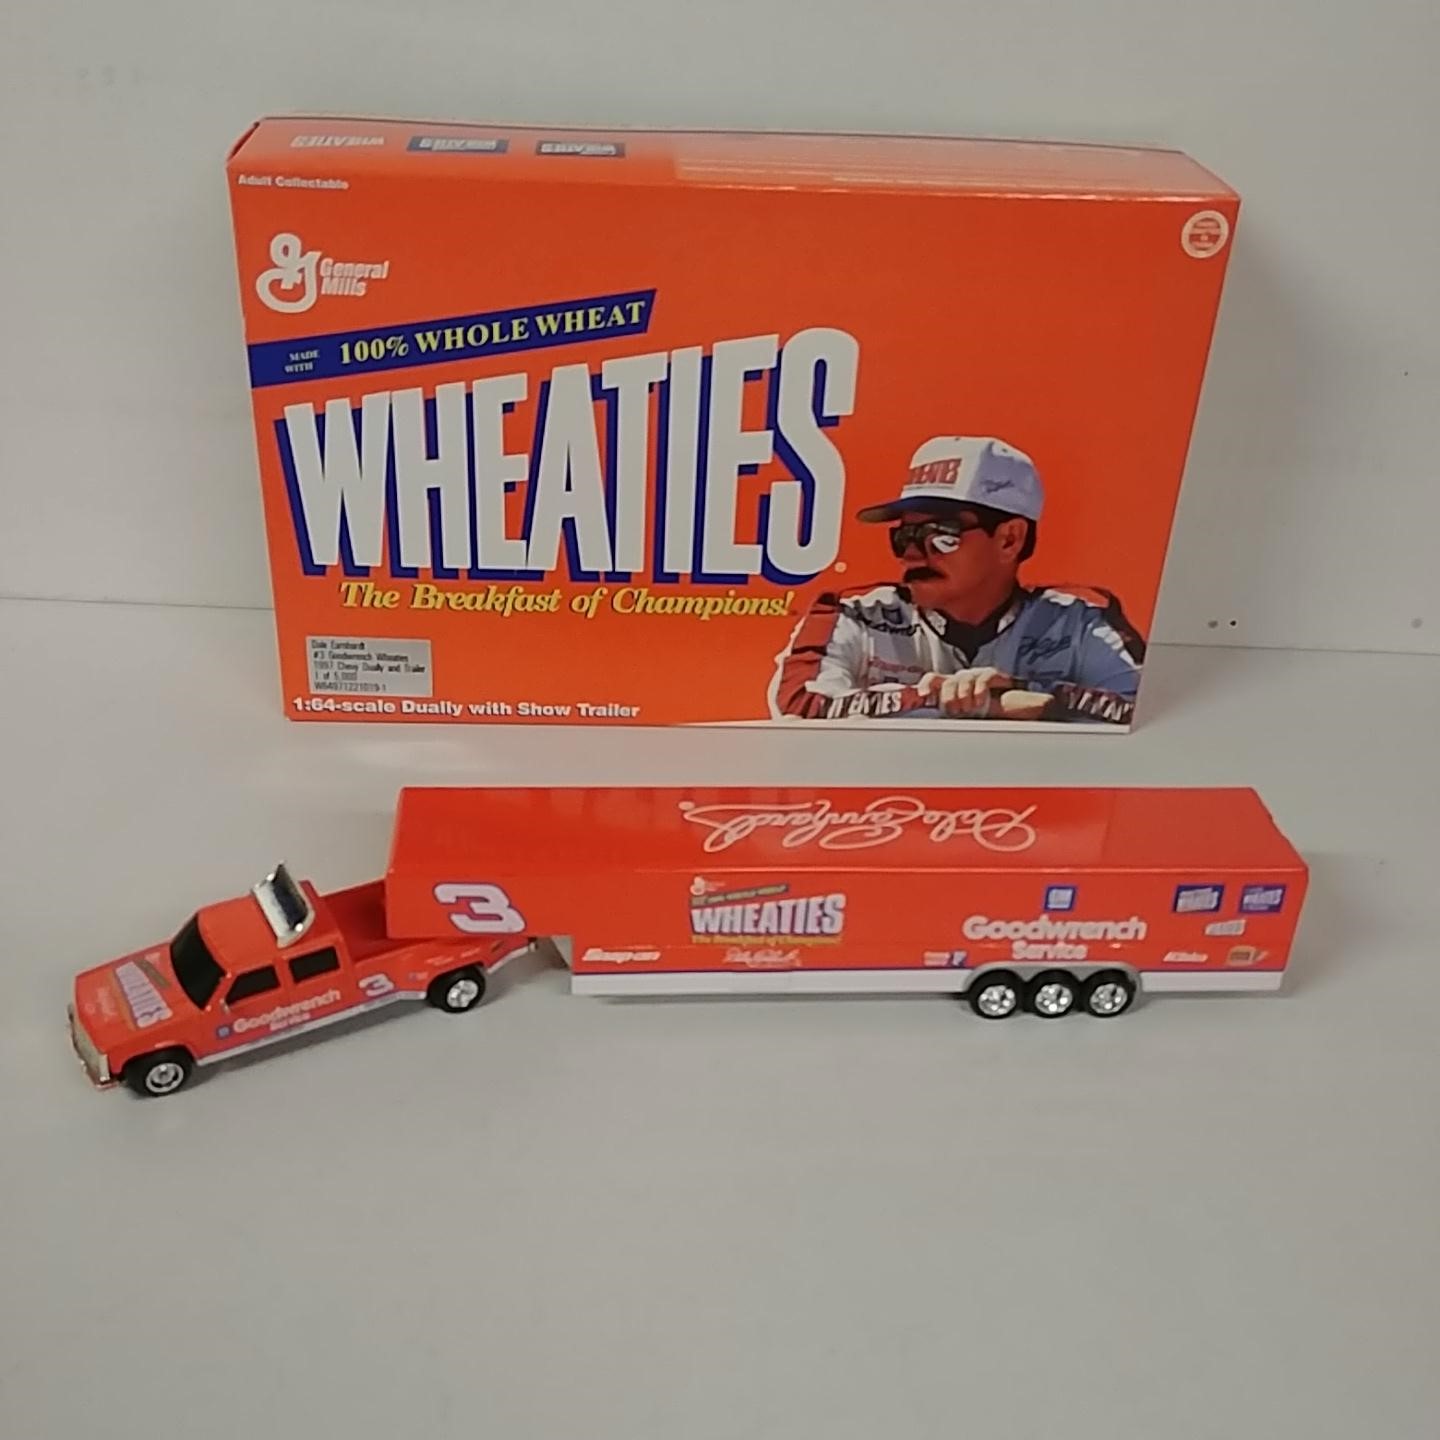 1997 Dale Earnhardt 1/64th Goodwrench "Wheaties" Dually and Trailor